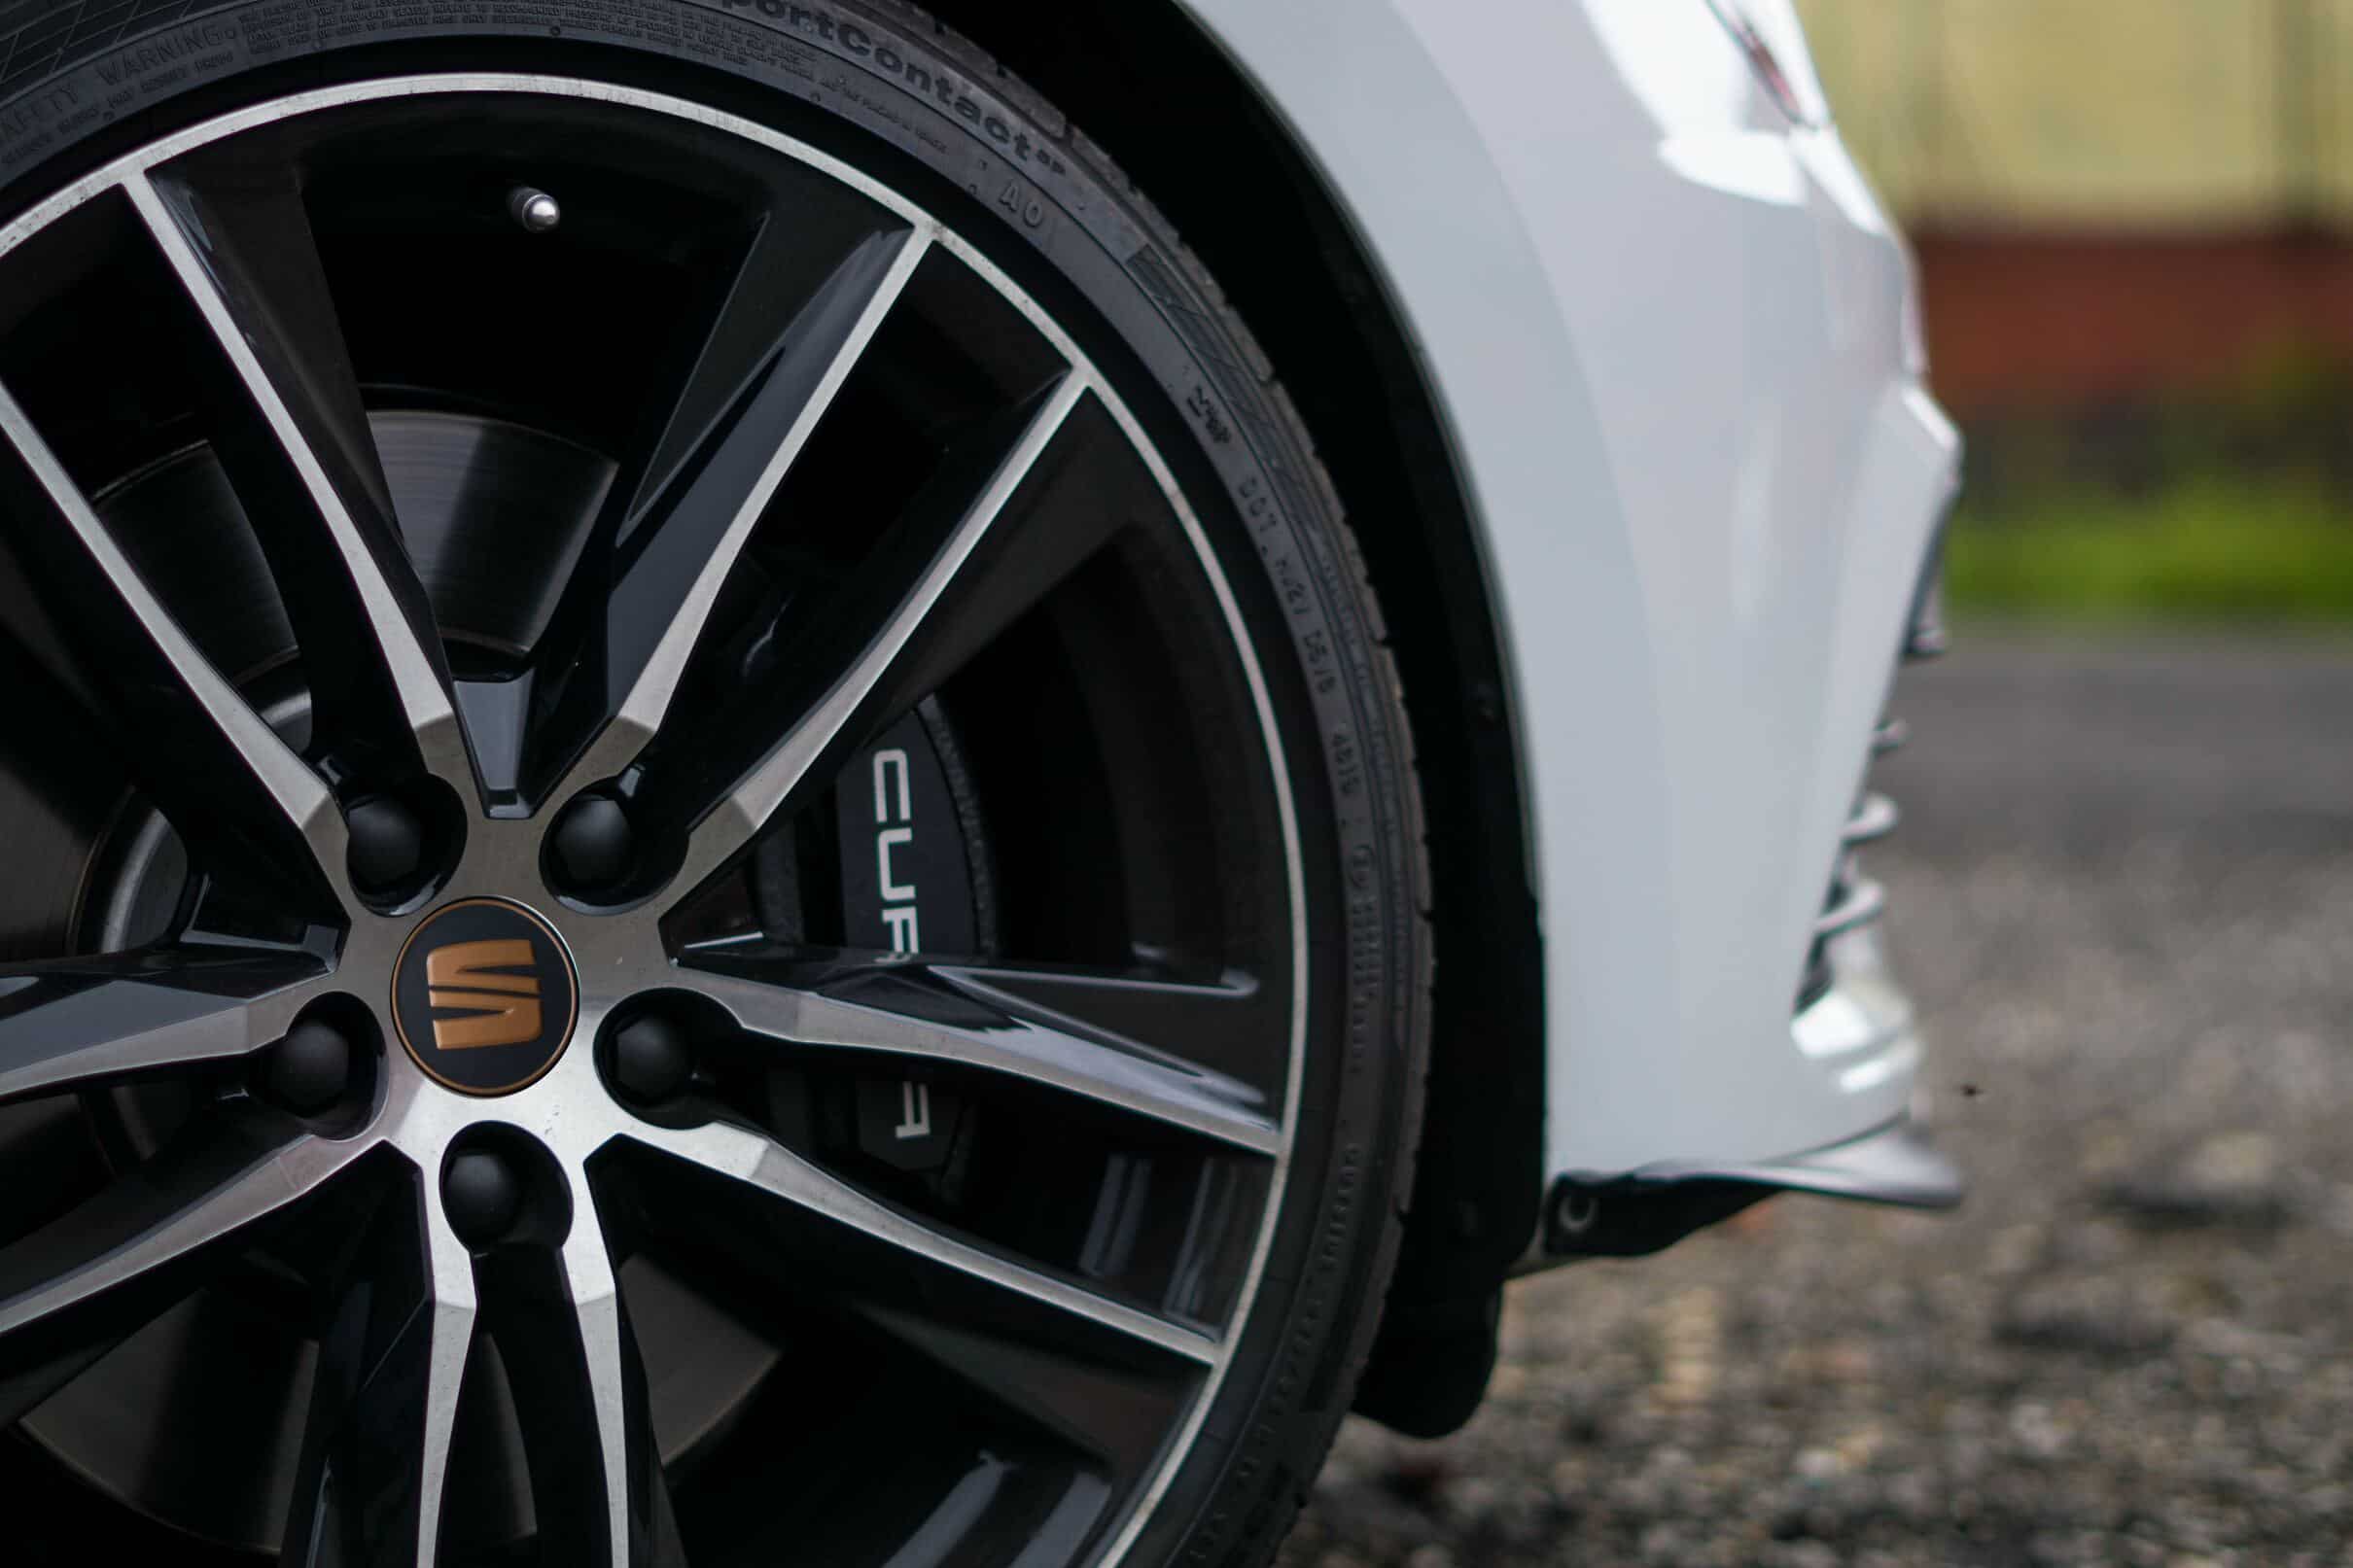 SEAT Leon Alloy Wheel - A close-up view of the stylish and intricate alloy wheel design.